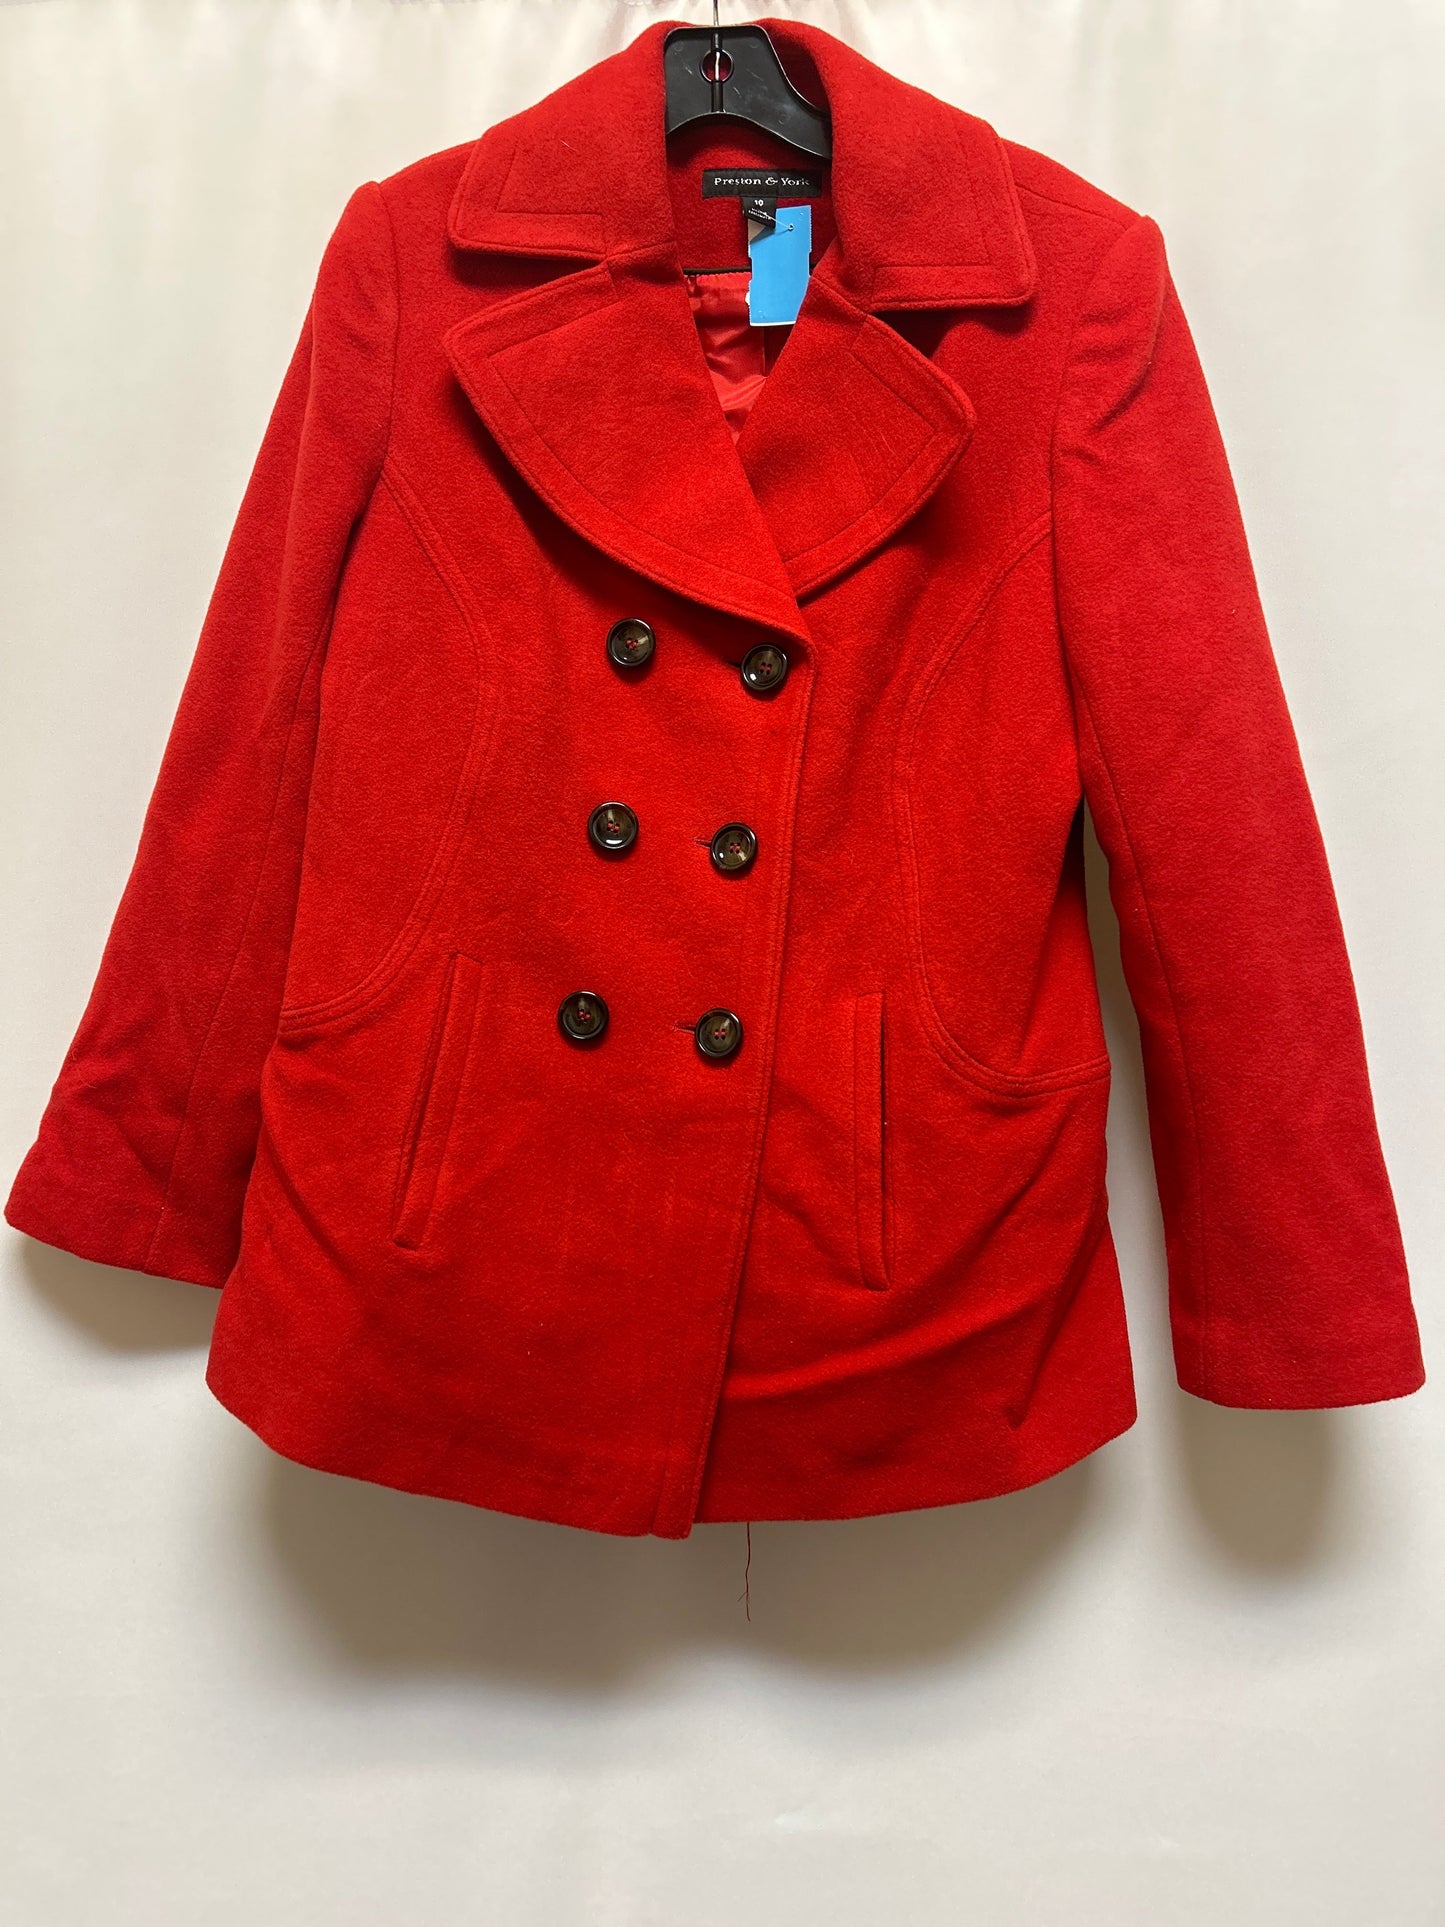 Coat Peacoat By Preston And New York  Size: M